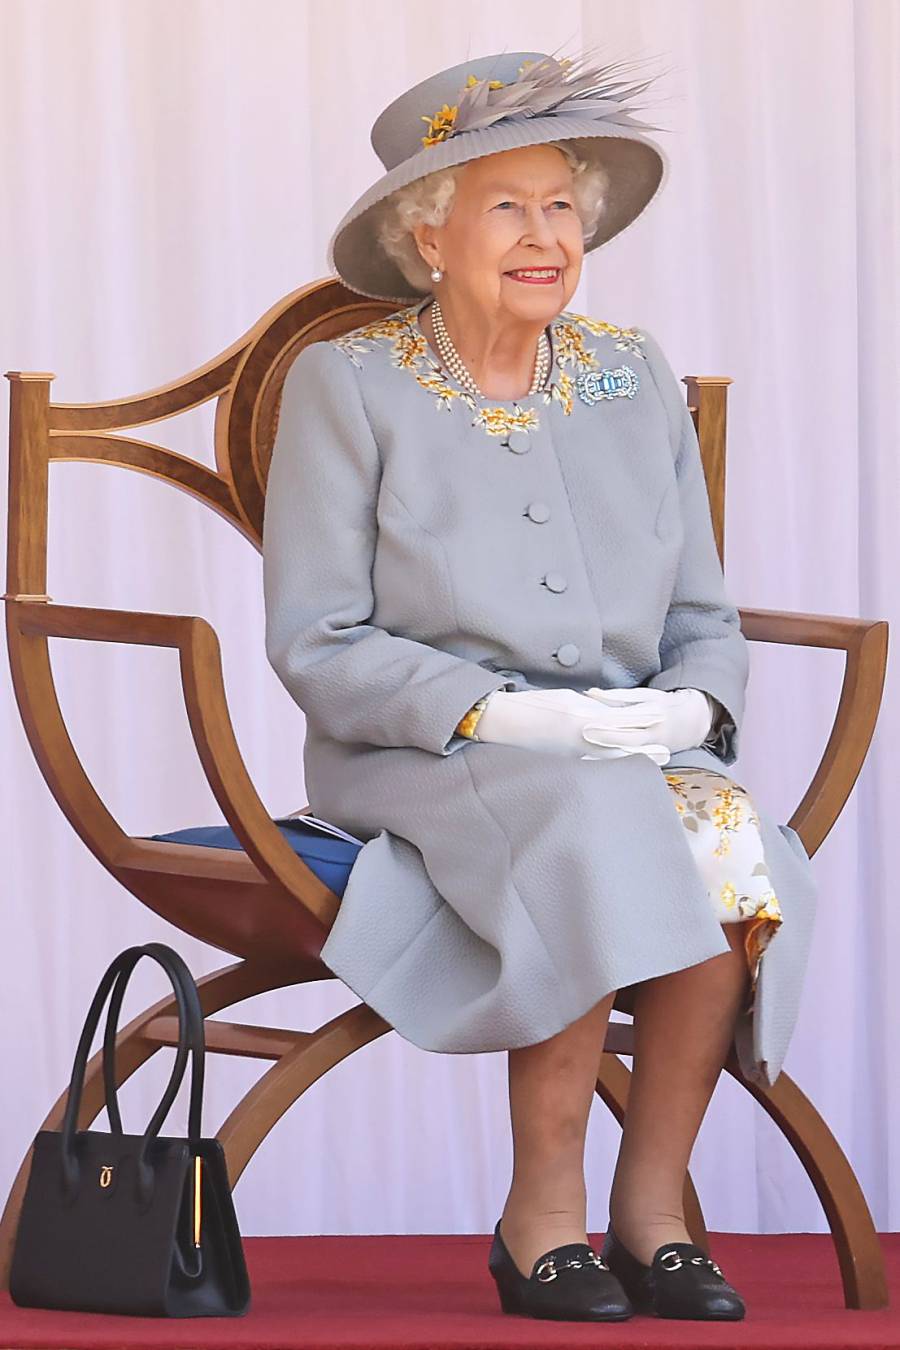 Queen Elizabeth Celebrates Trooping of the Colour Without the Royal Family: Photos